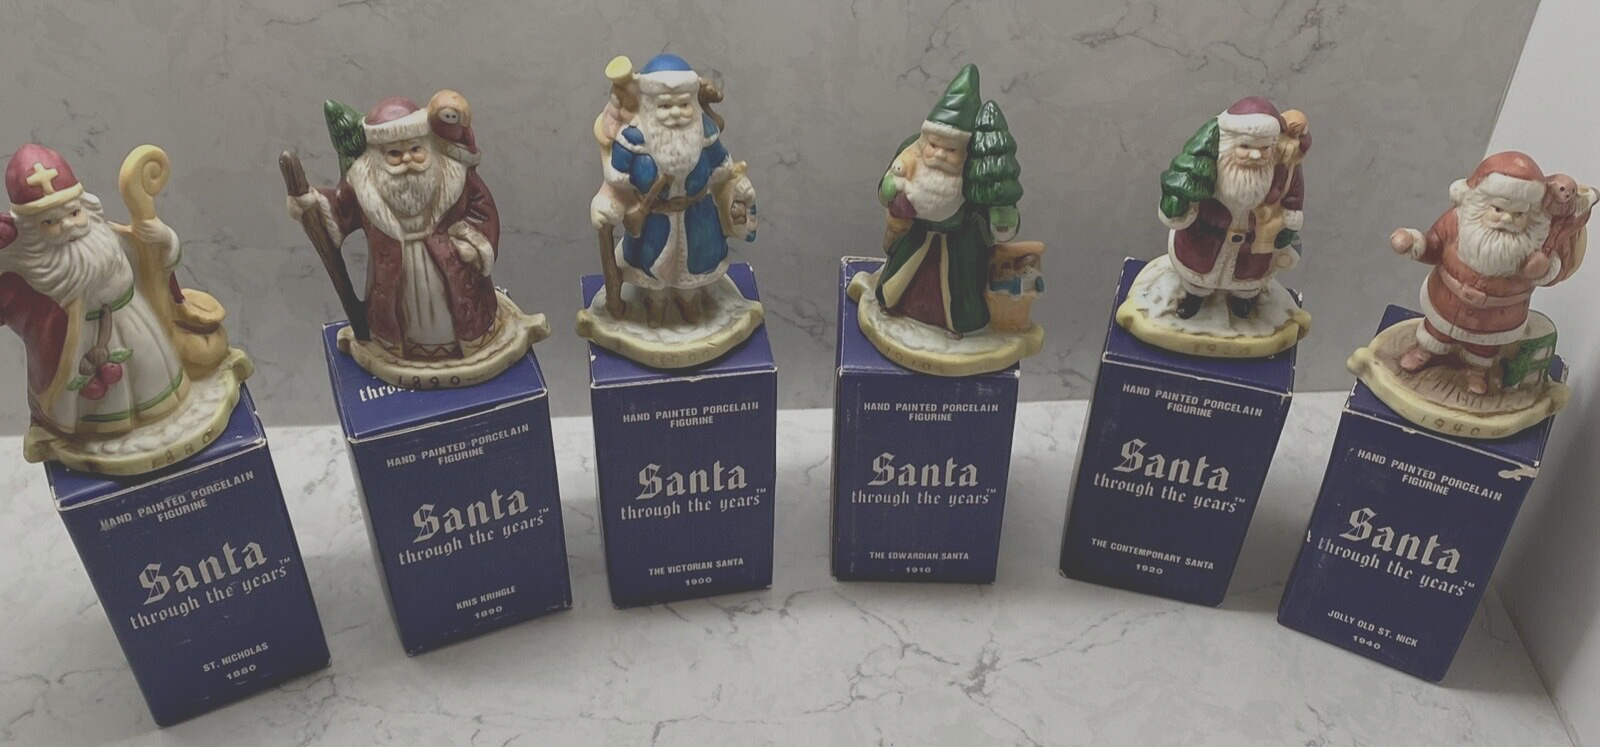 Santa Through The Years Figurines Complete Set of 6 in Original Boxes